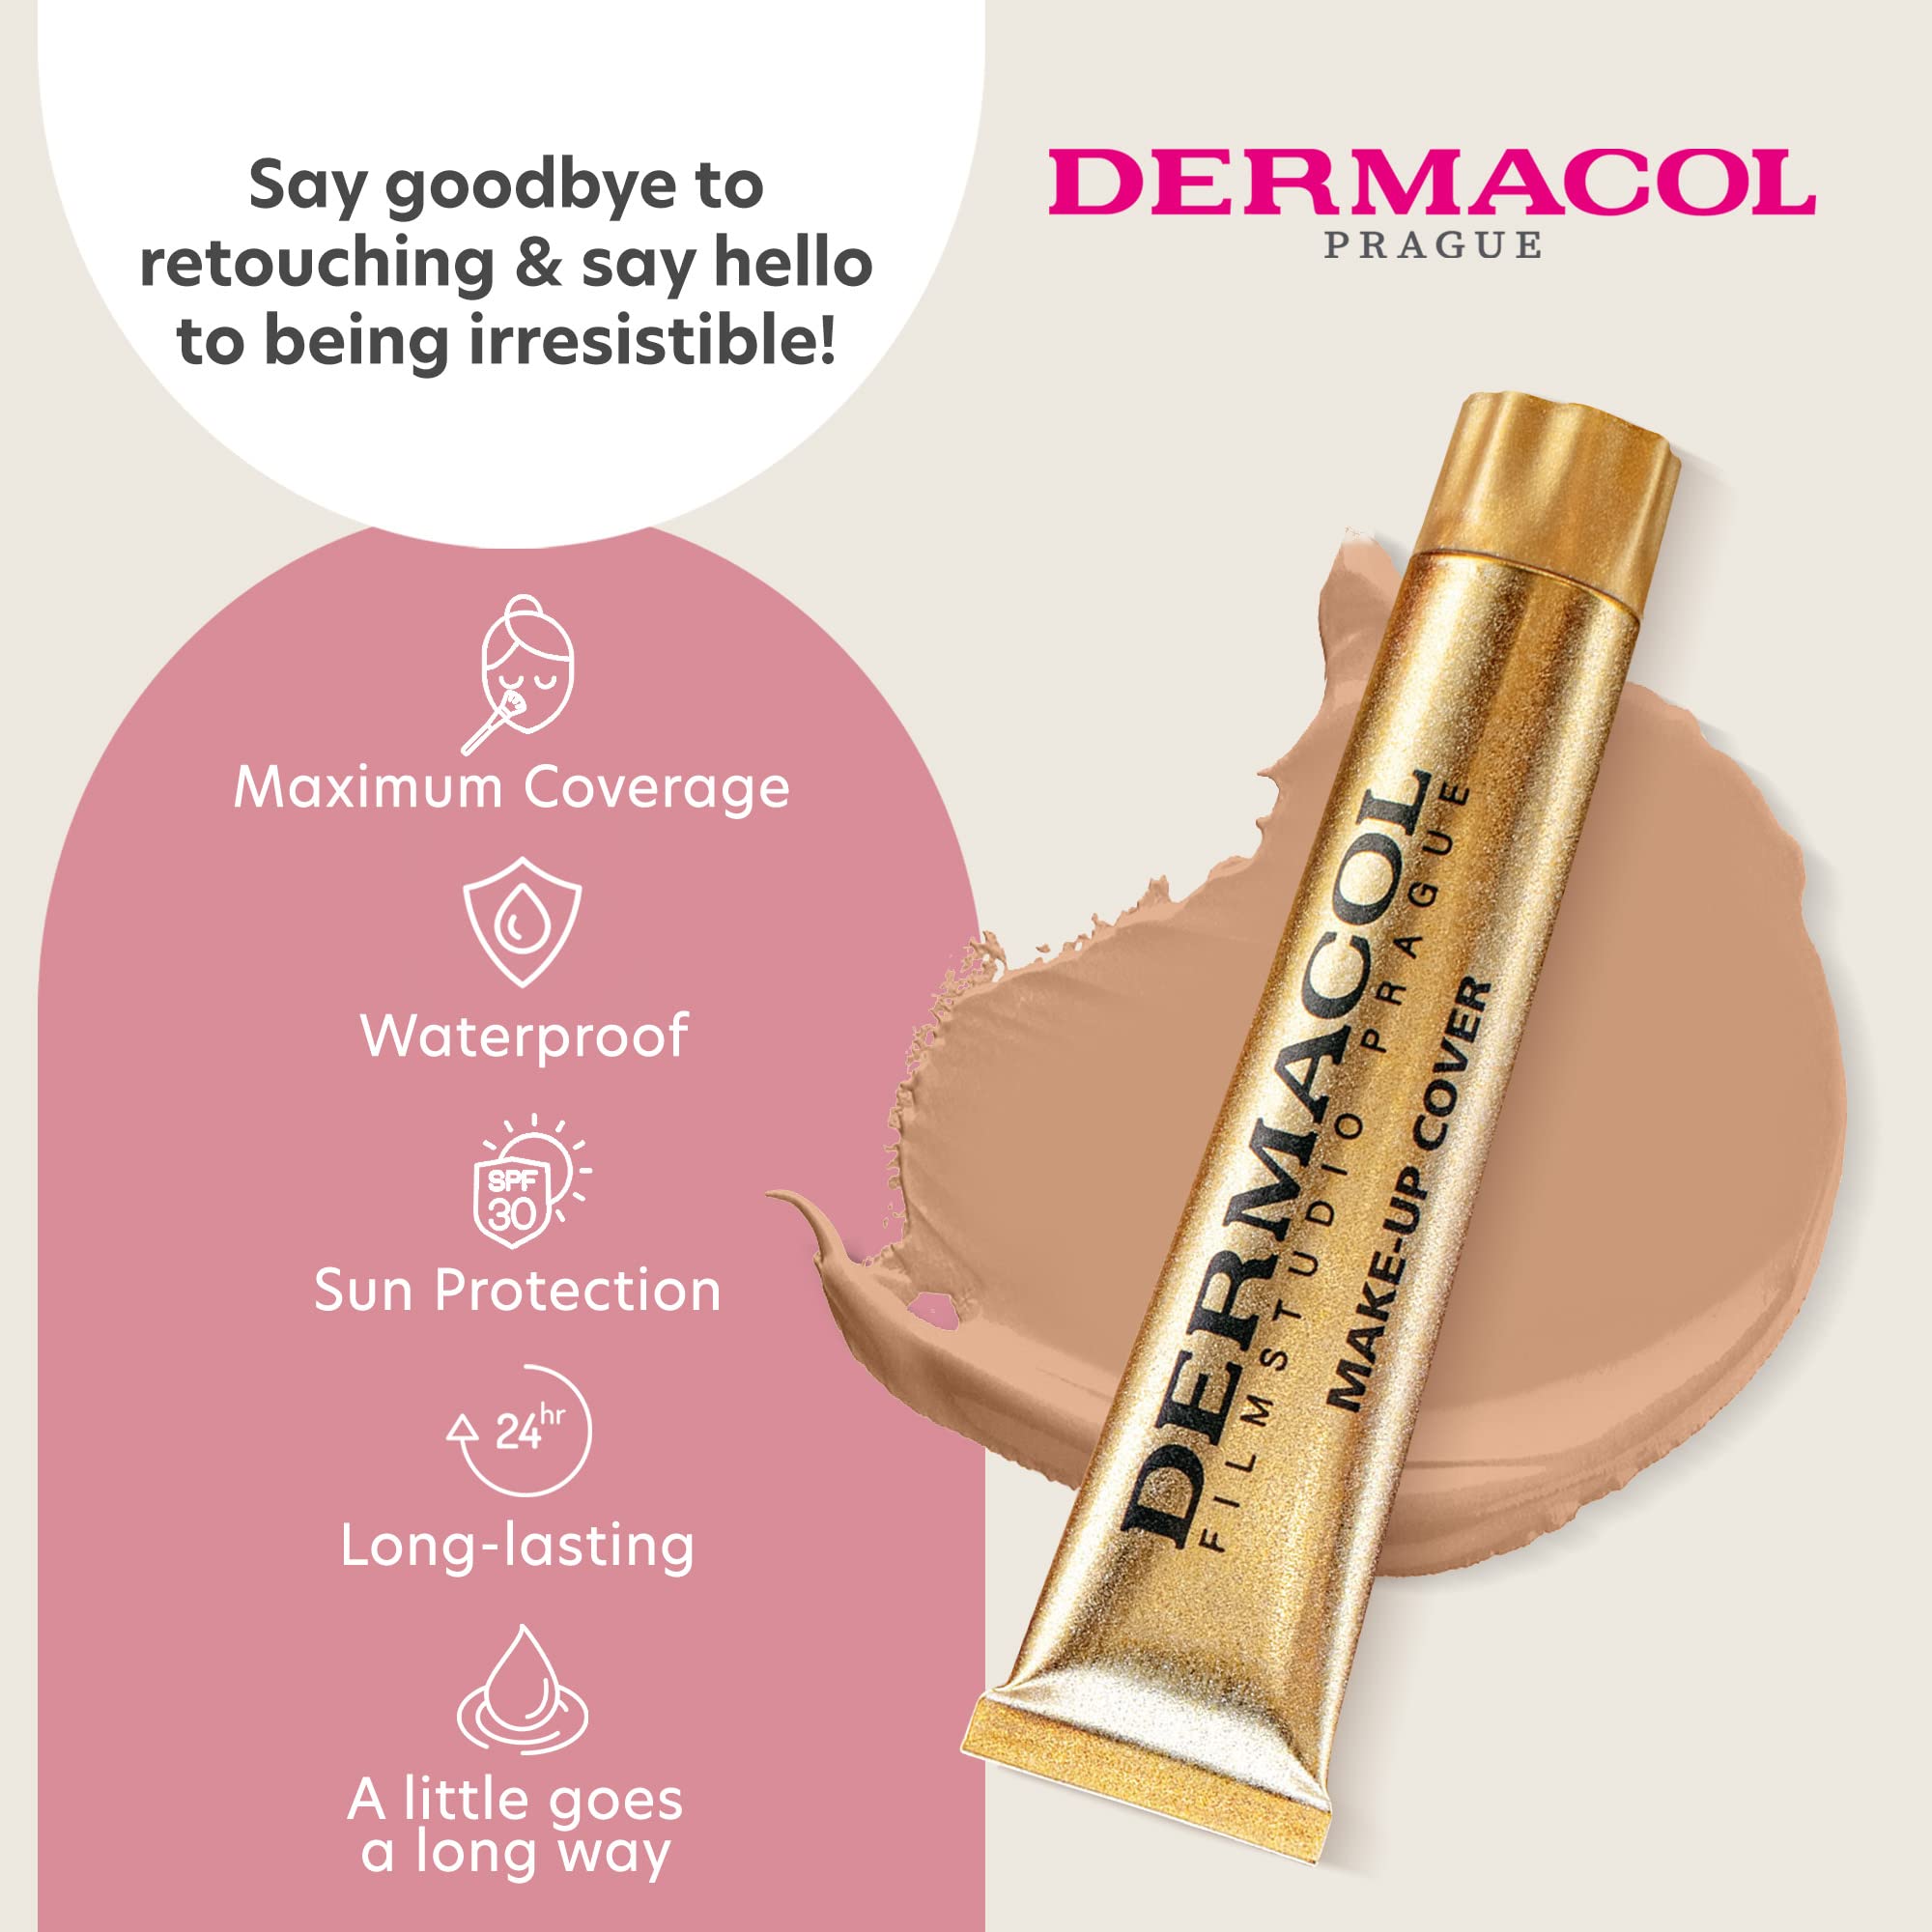 Dermacol - Full Coverage Foundation, Liquid Makeup Matte Foundation with SPF 30, Waterproof Foundation for Oily Skin, Acne, & Under Eye Bags, Long-Lasting Makeup Products, 30g, Shade 221